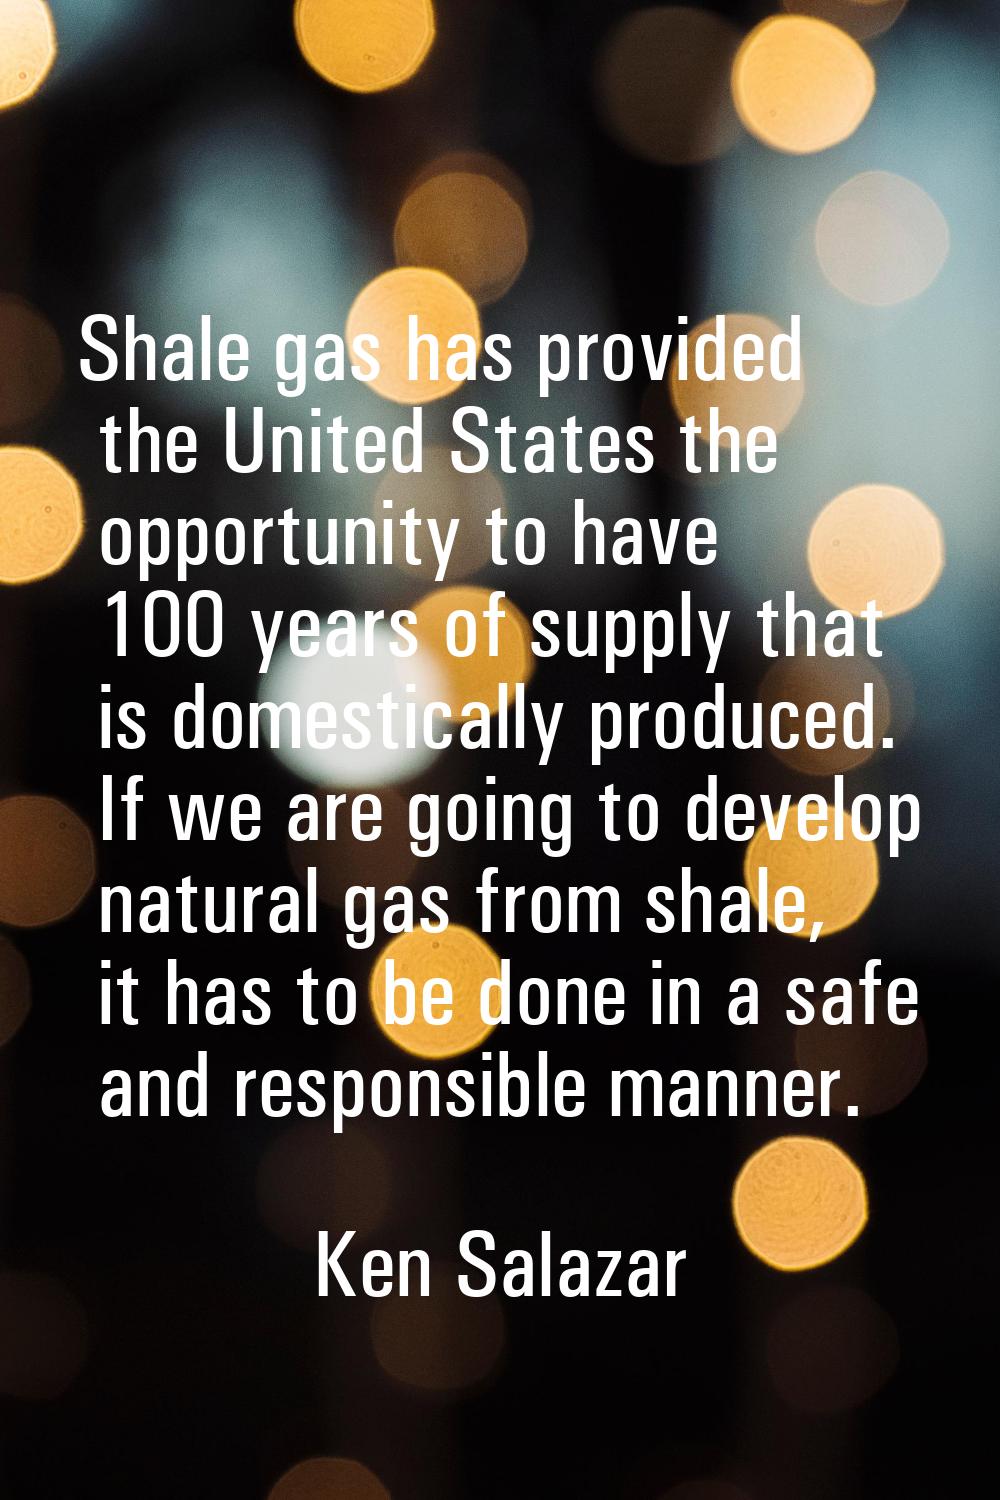 Shale gas has provided the United States the opportunity to have 100 years of supply that is domest